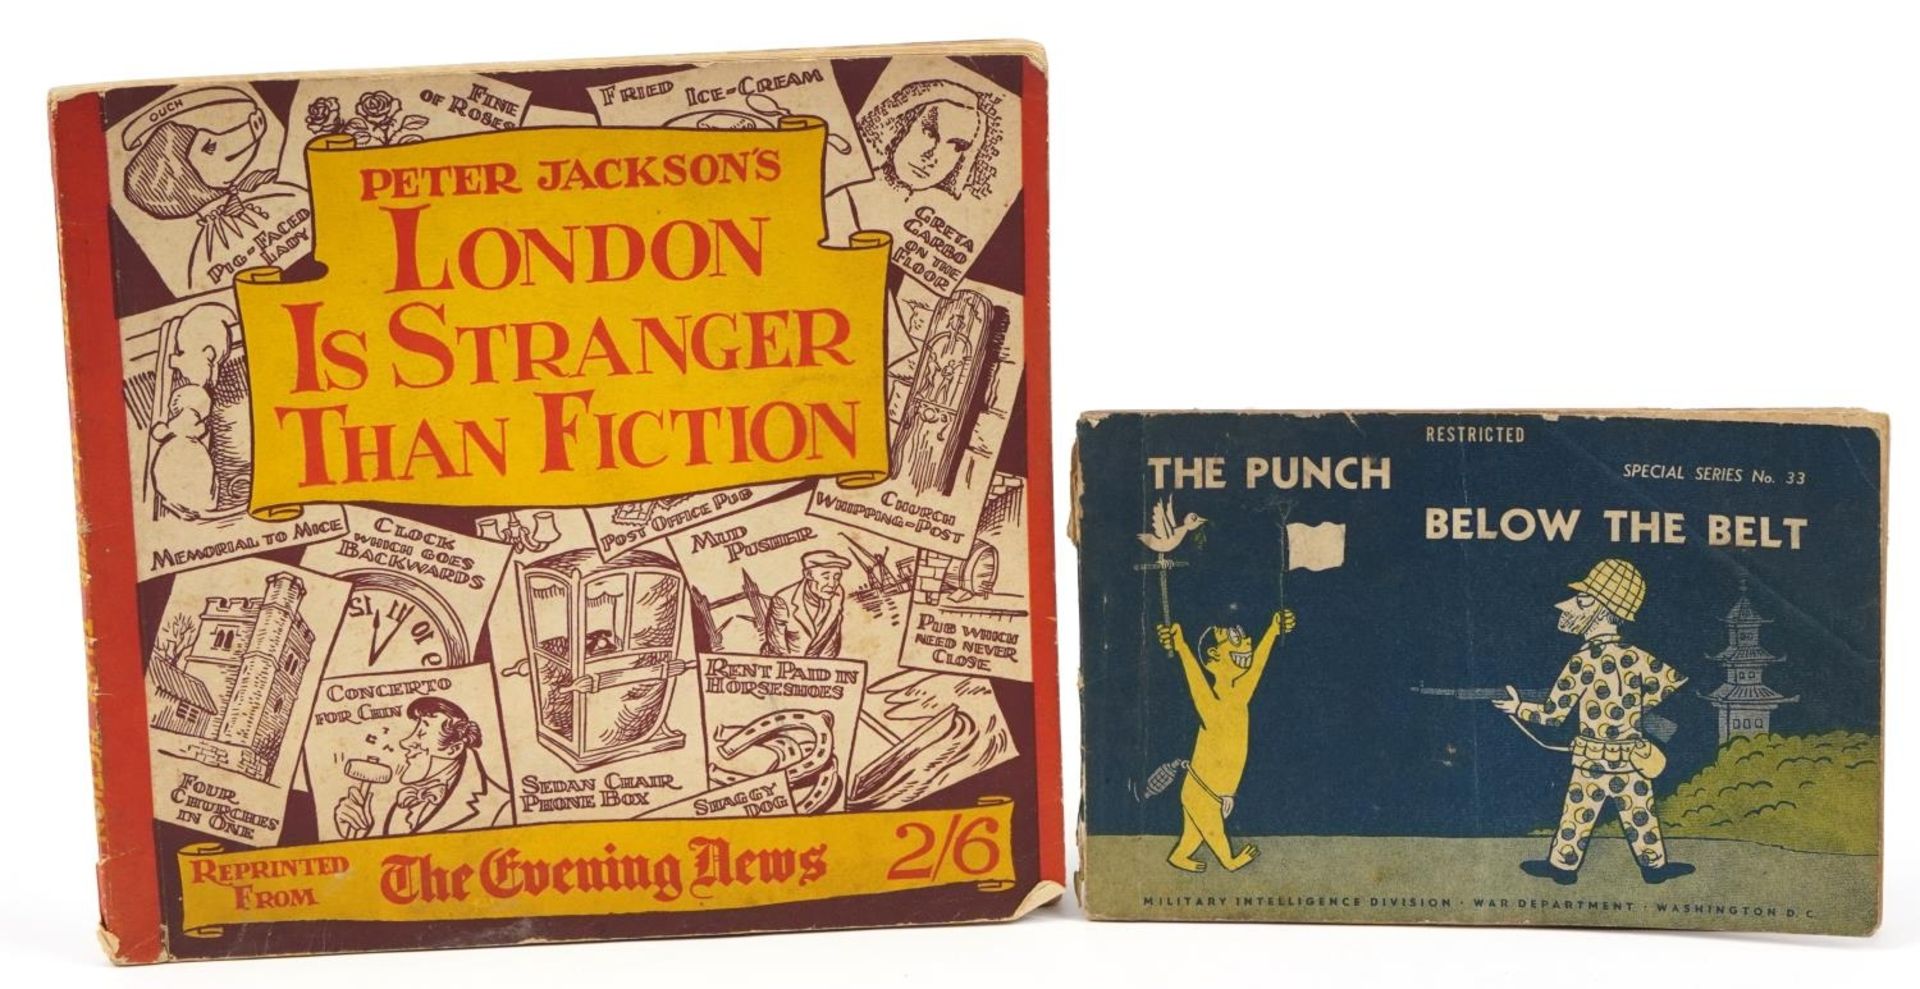 Two vintage books comprising The Punch Below the Belt and Peter Jackson's London is Stranger than